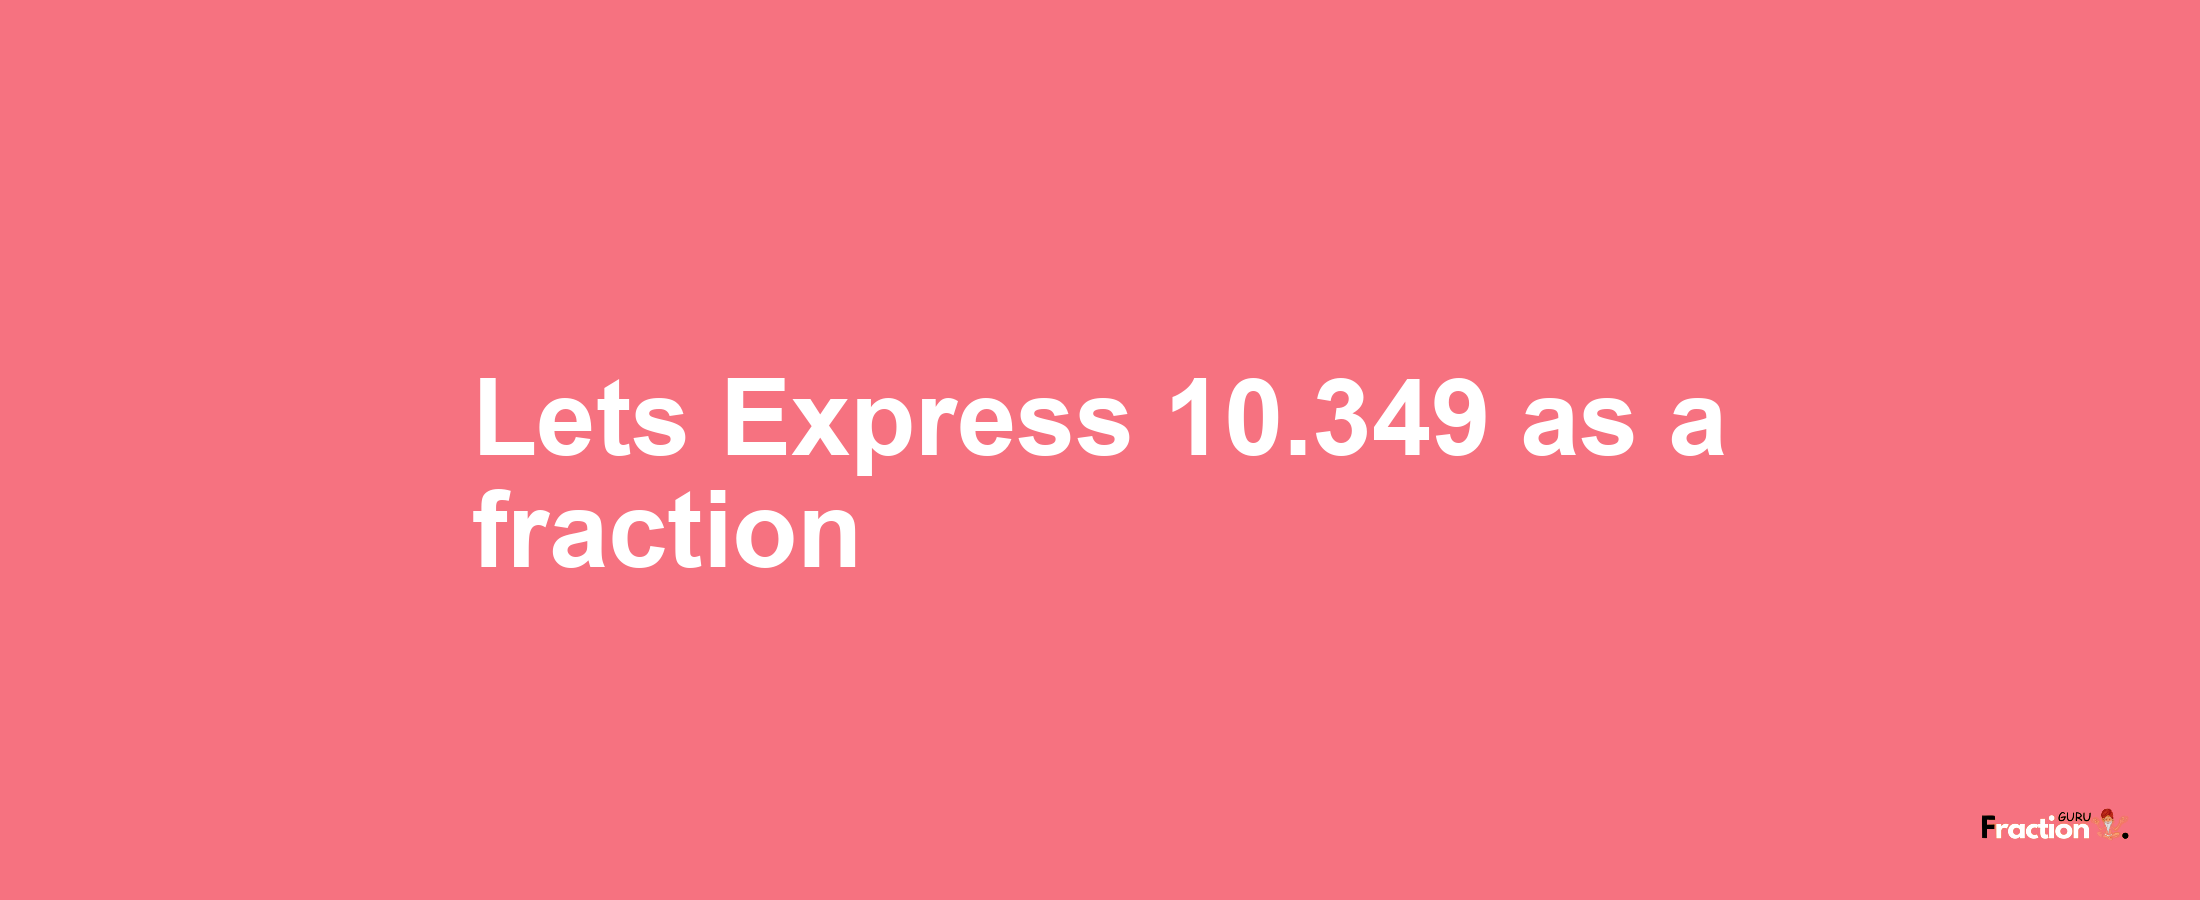 Lets Express 10.349 as afraction